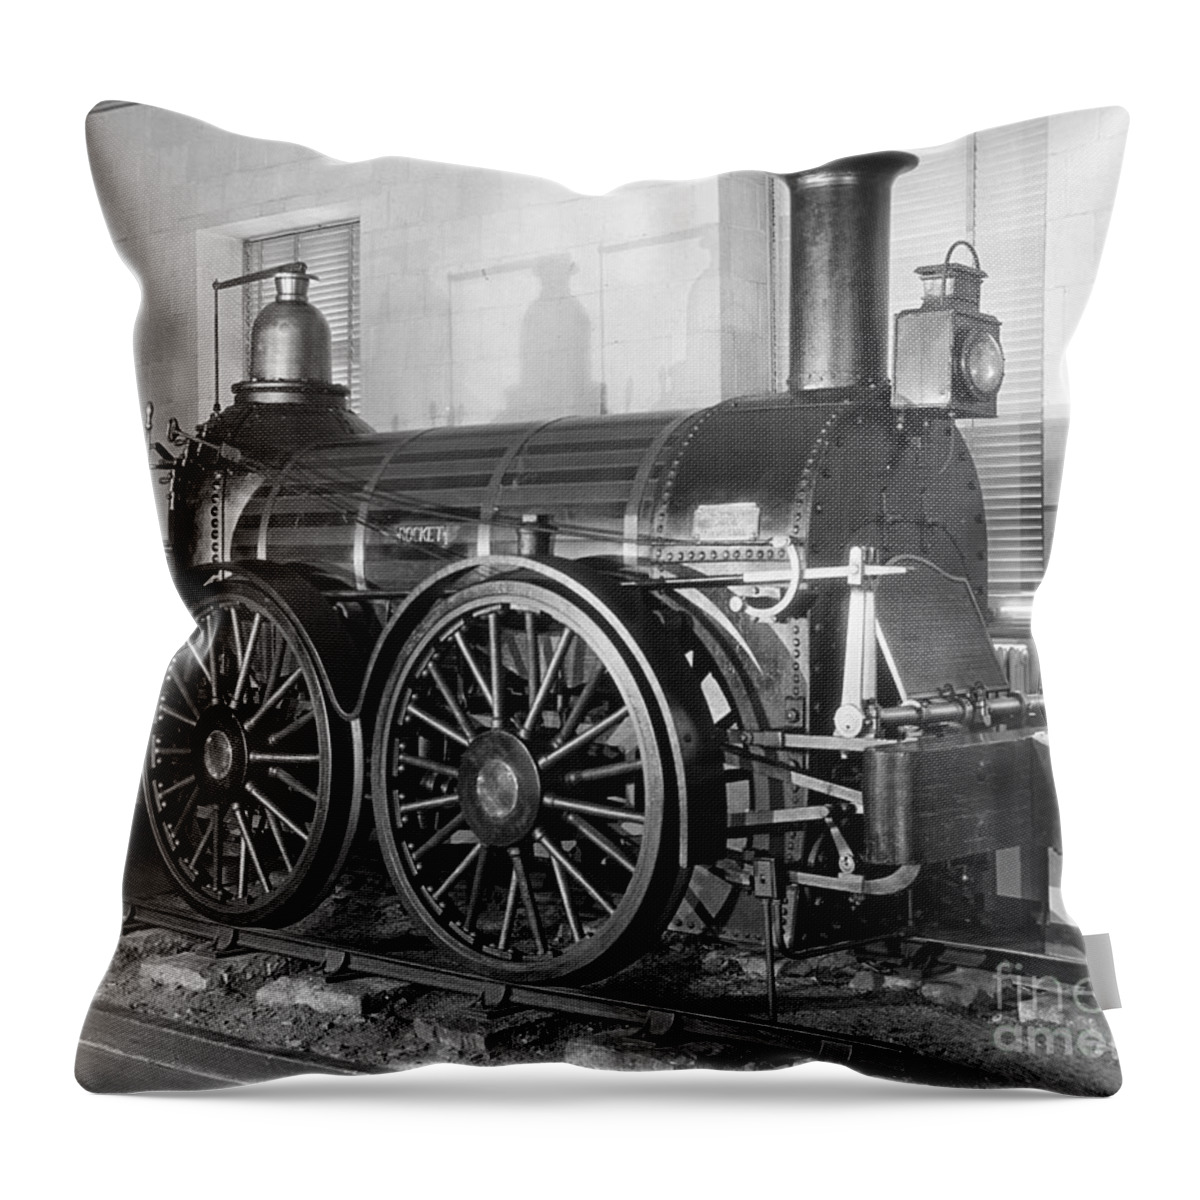 1829 Throw Pillow featuring the photograph Locomotive: Rocket, 1829 by Granger